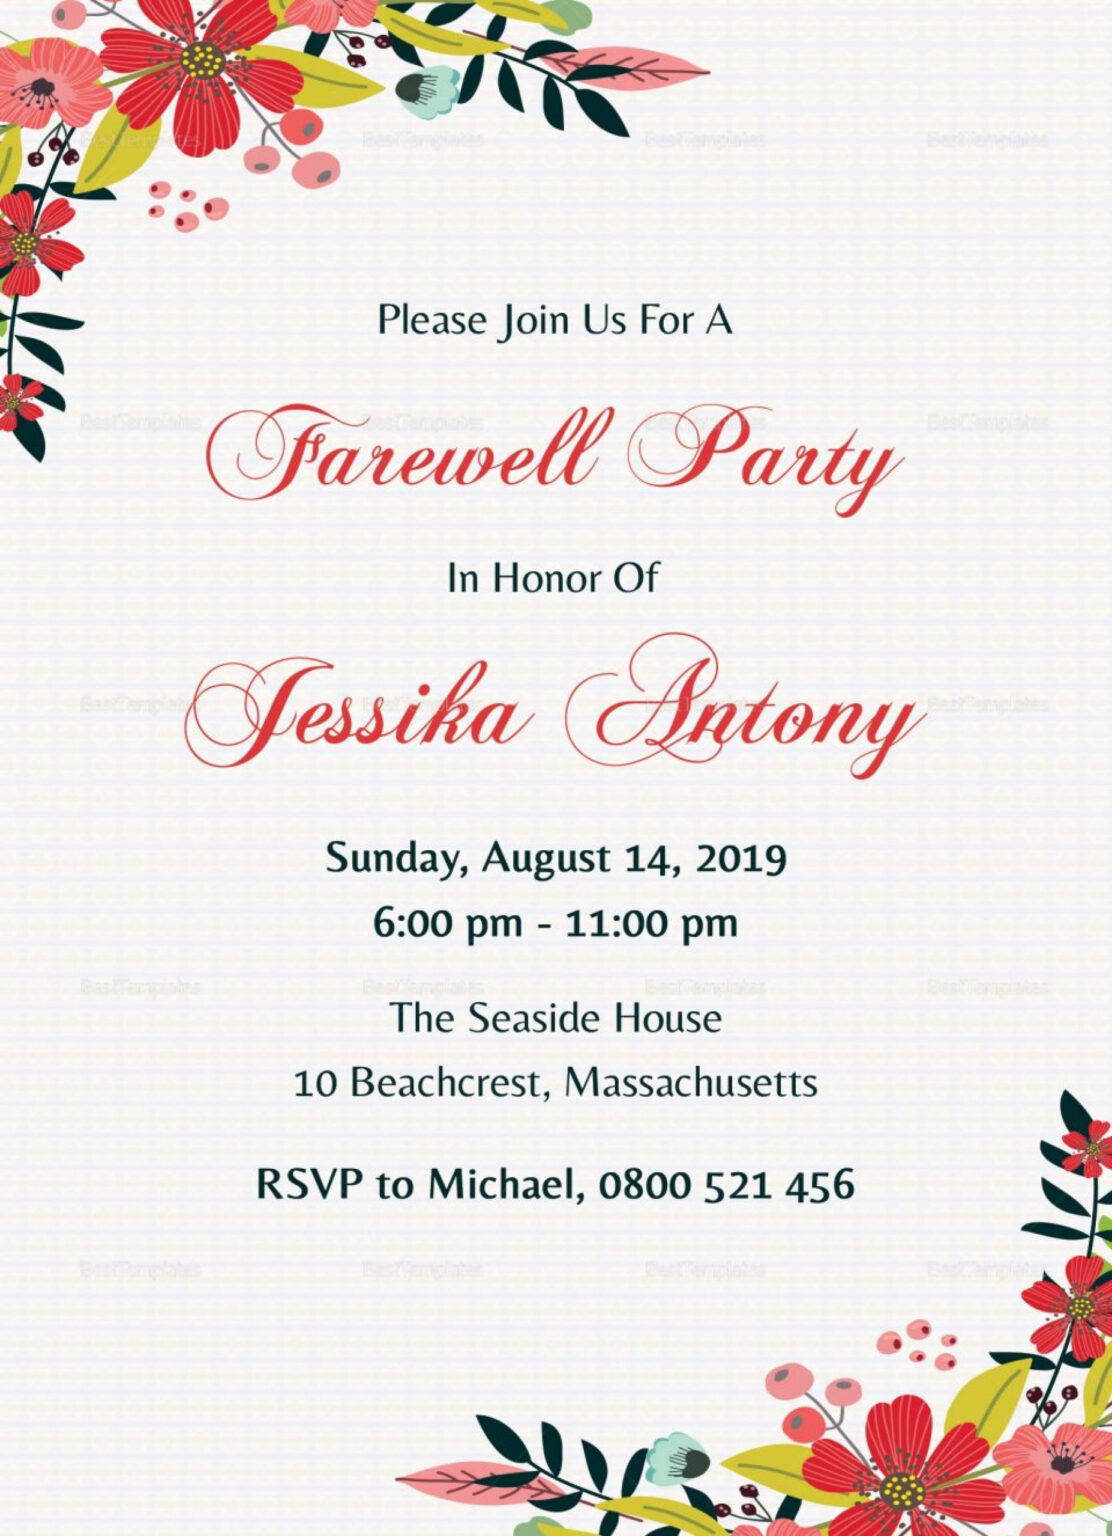 unique-invitation-card-for-teachers-on-farewell-party-pertaining-to